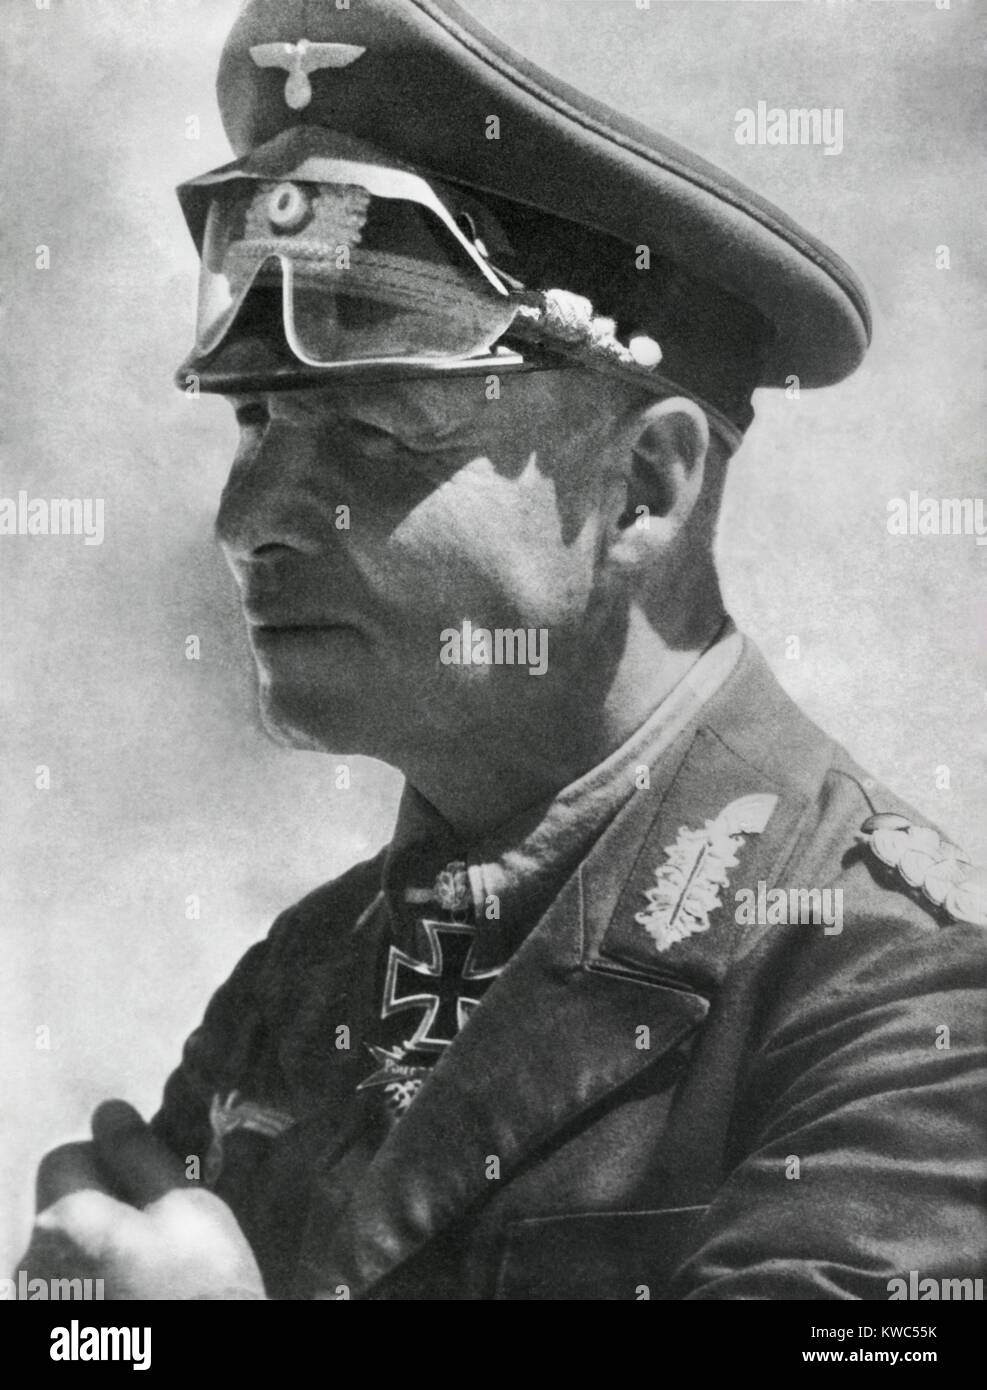 Field Marshal Erwin Rommel in North Africa, Jan. 1942. He wears his Knight's Cross of the Iron Cross with Oak Leaves and Swords. World War 2 (BSLOC 2015 13 64) Stock Photo